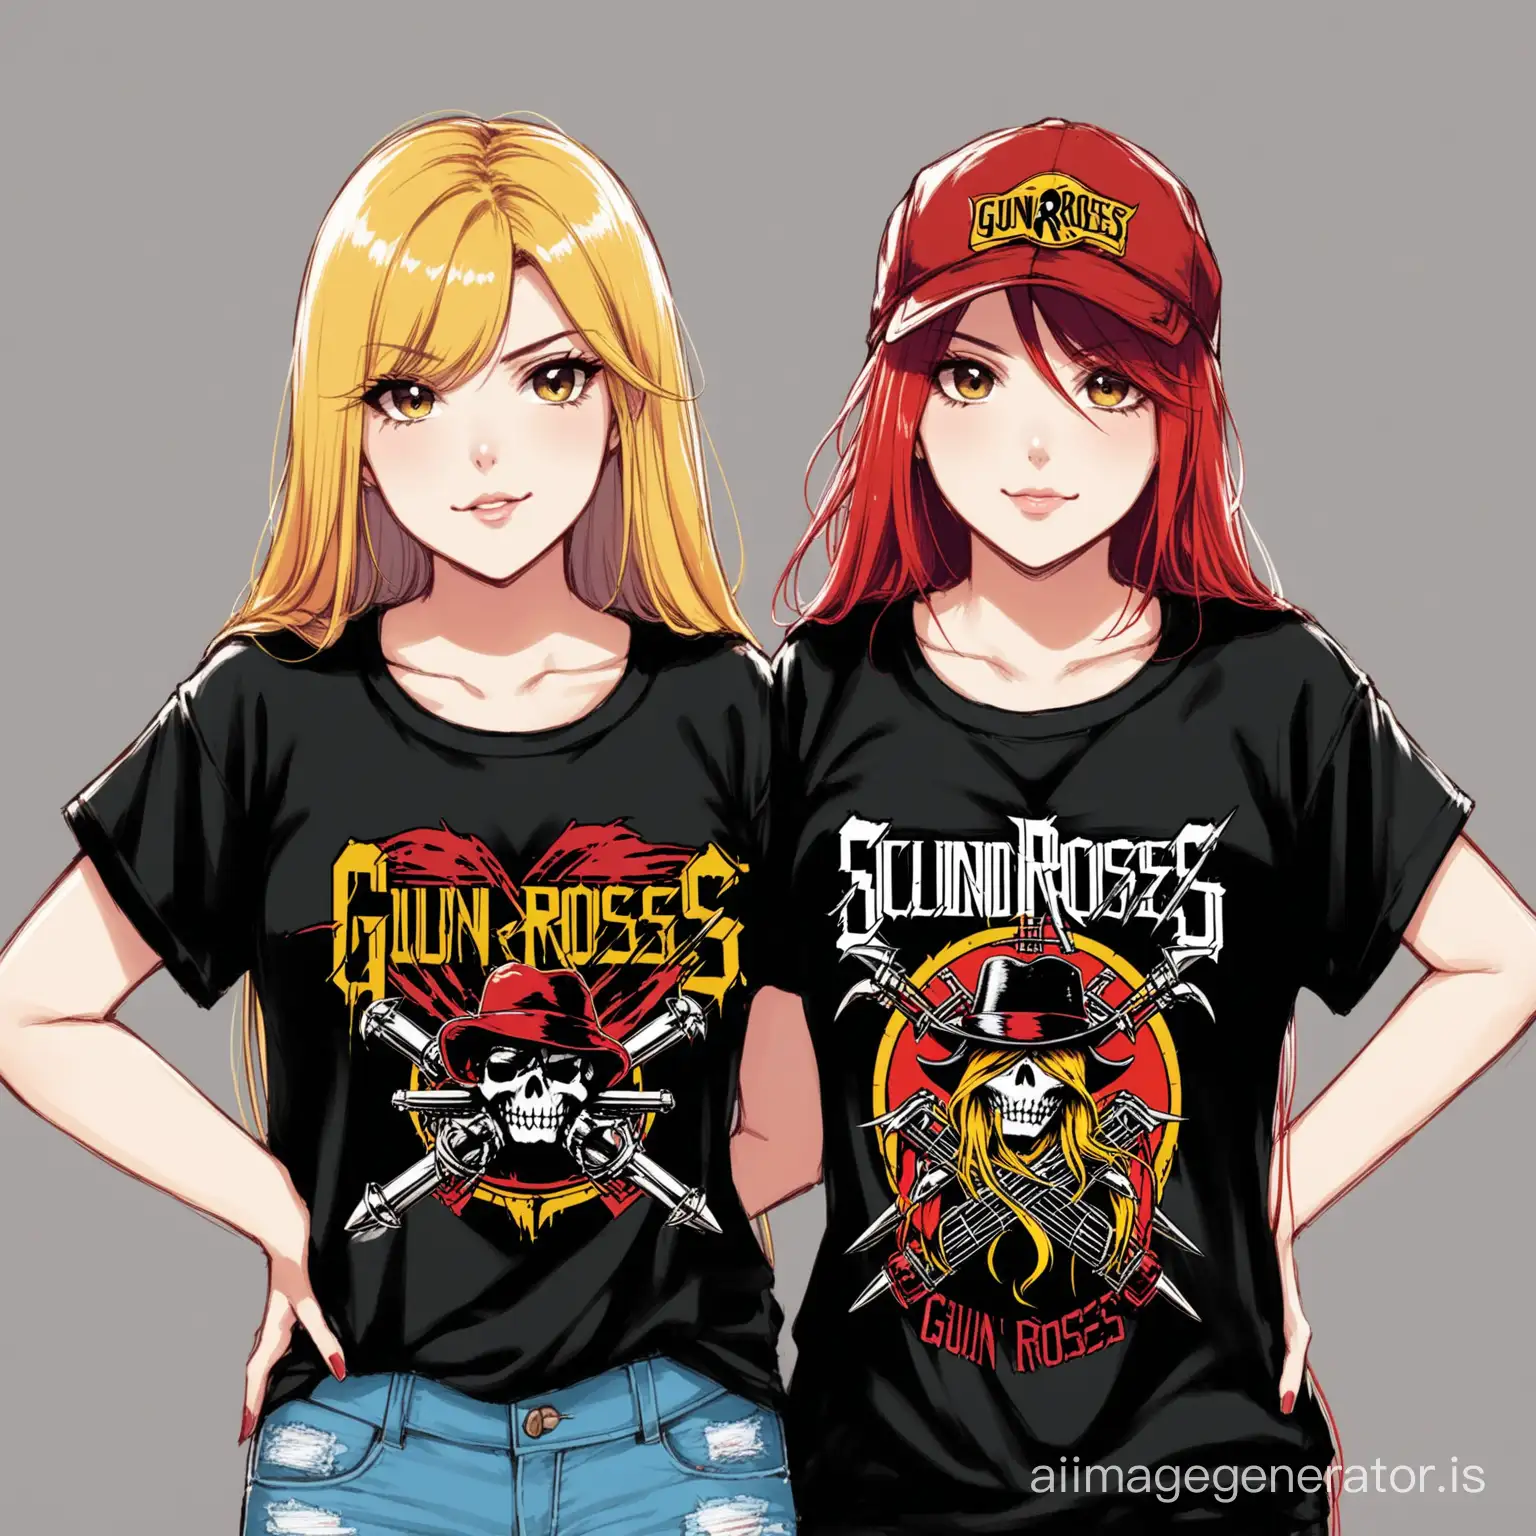 Two girls : one is wearing gunsnroses tshirt and the second one is wearing scorpions thirt